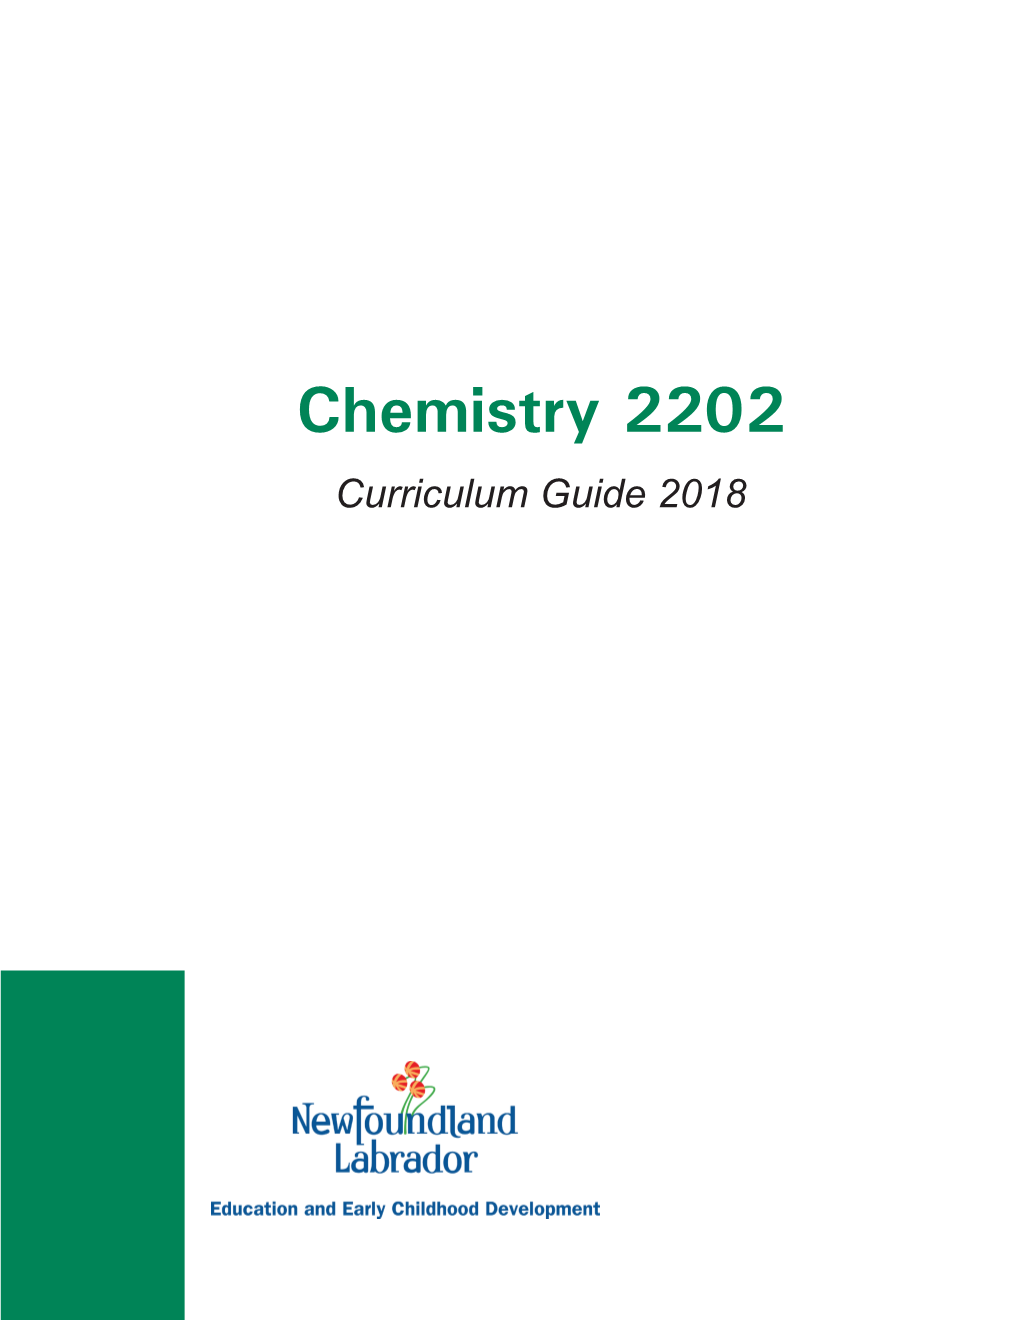 Chemistry 2202 Curriculum Guide 2018